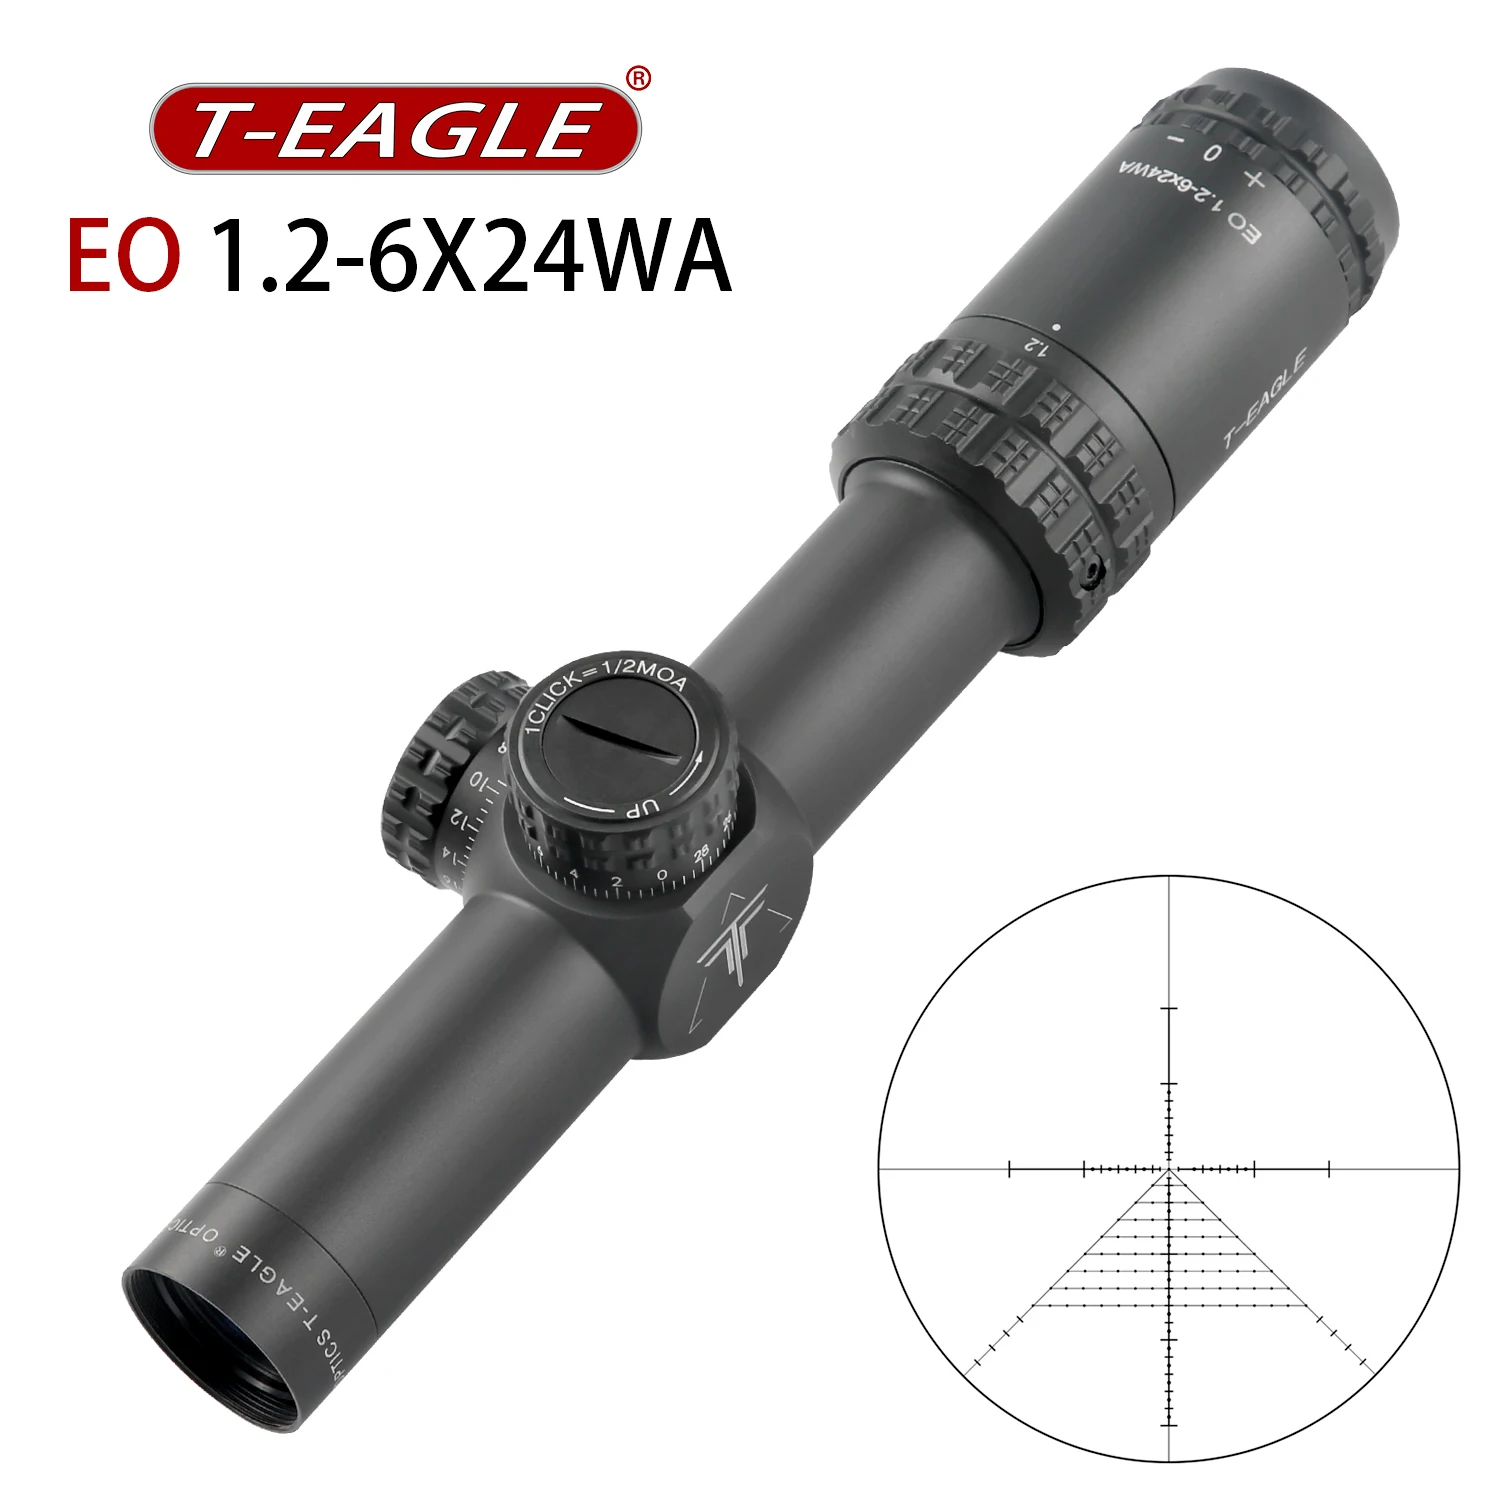 

T-EAGLE EO 1.2-6X24 Hunting Scopes Rifle Scopes With illumination Tactical Riflescope for Airsoft Air Guns Sniper Rifle Scope